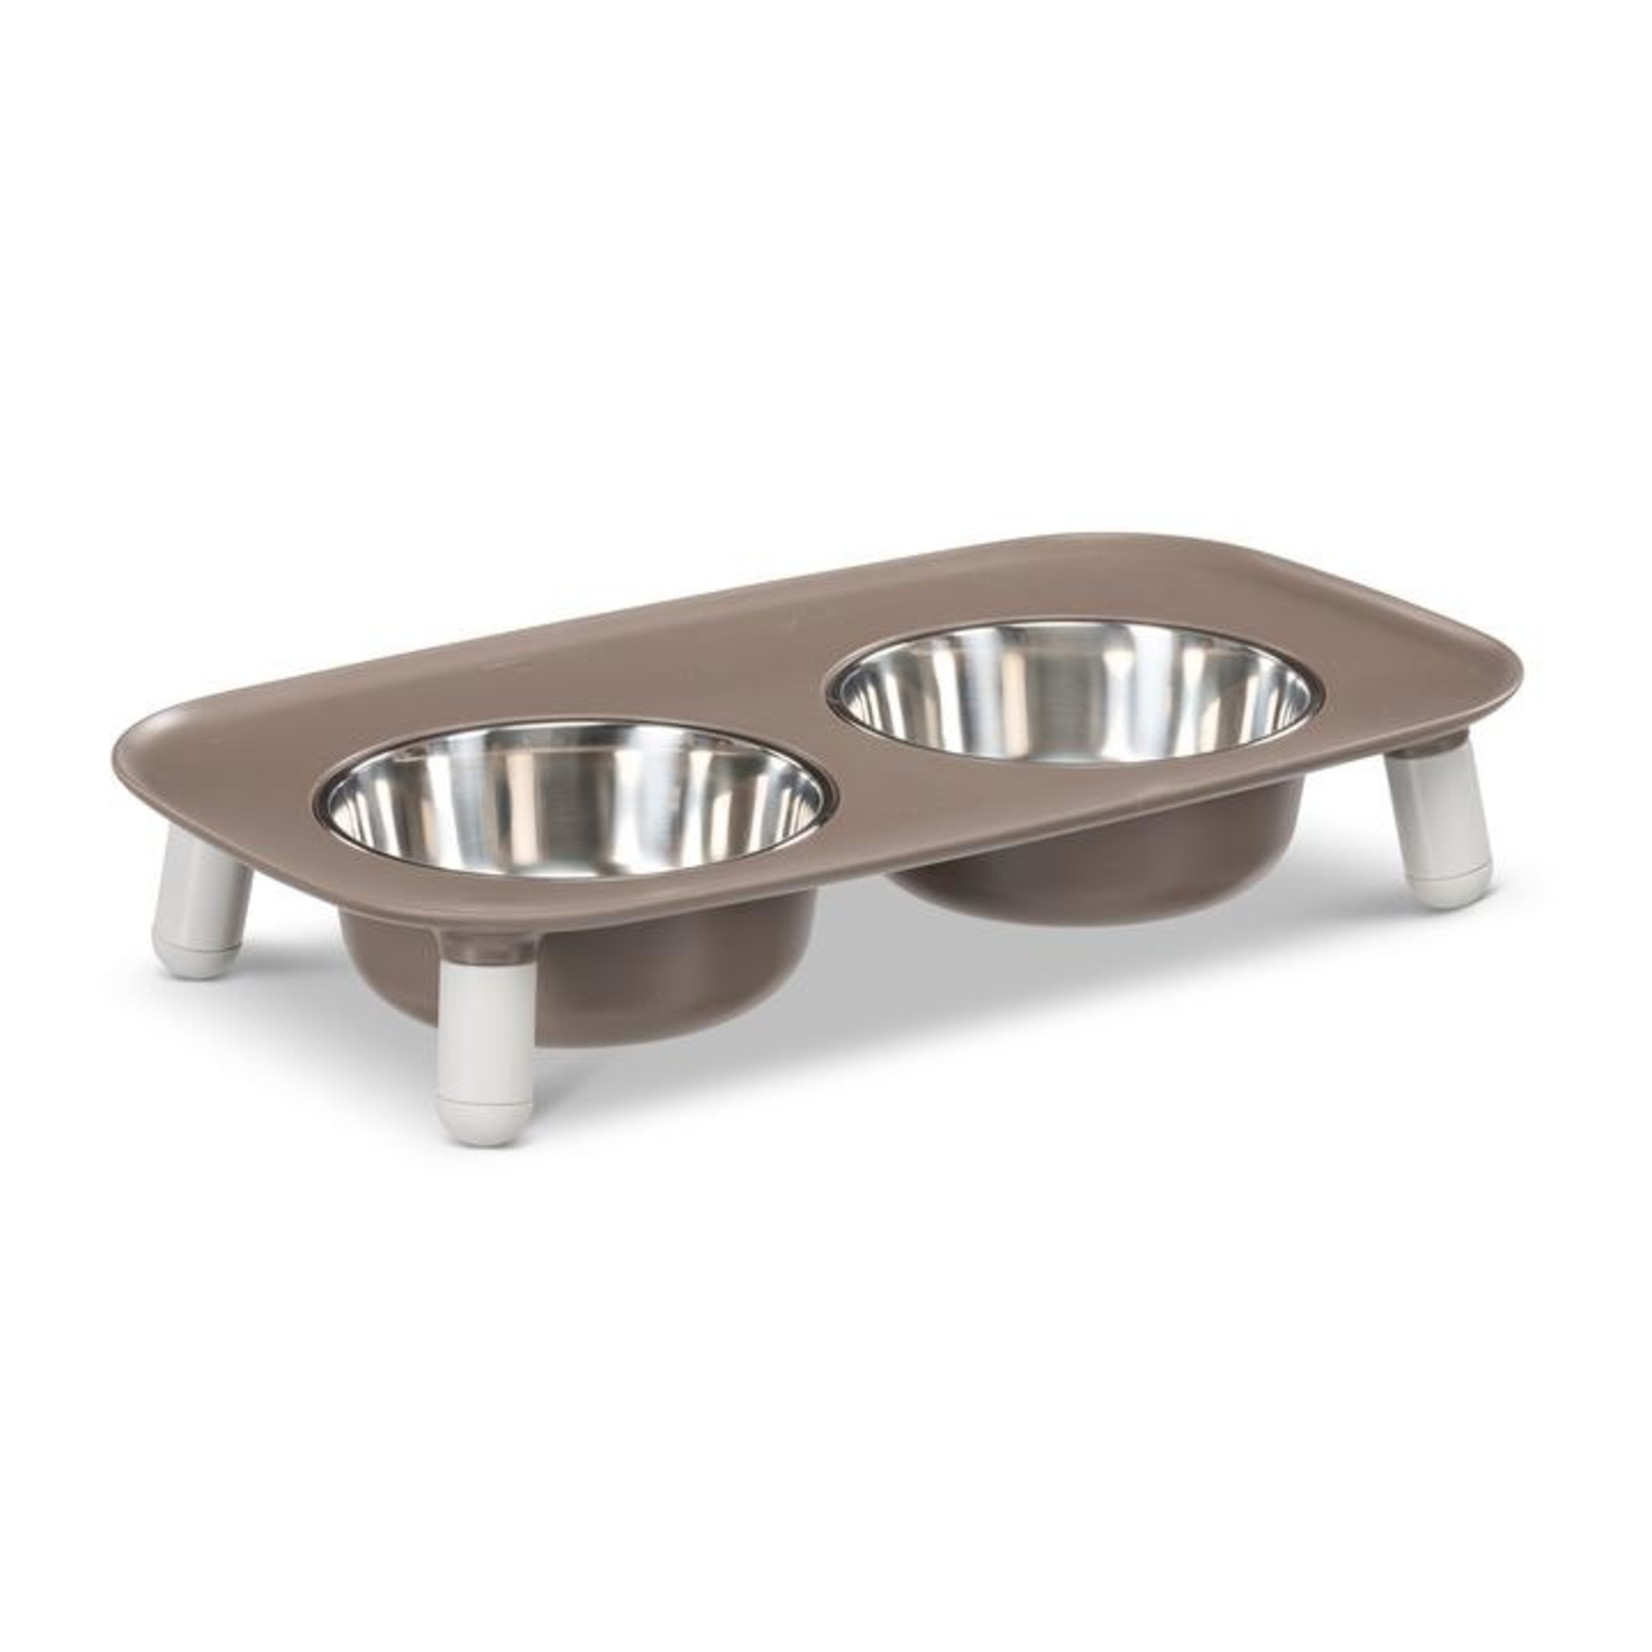 Messy Mutts MESSY MUTTS ELEVATED DOUBLE FEEDER - ADJUSTABLE GRAY